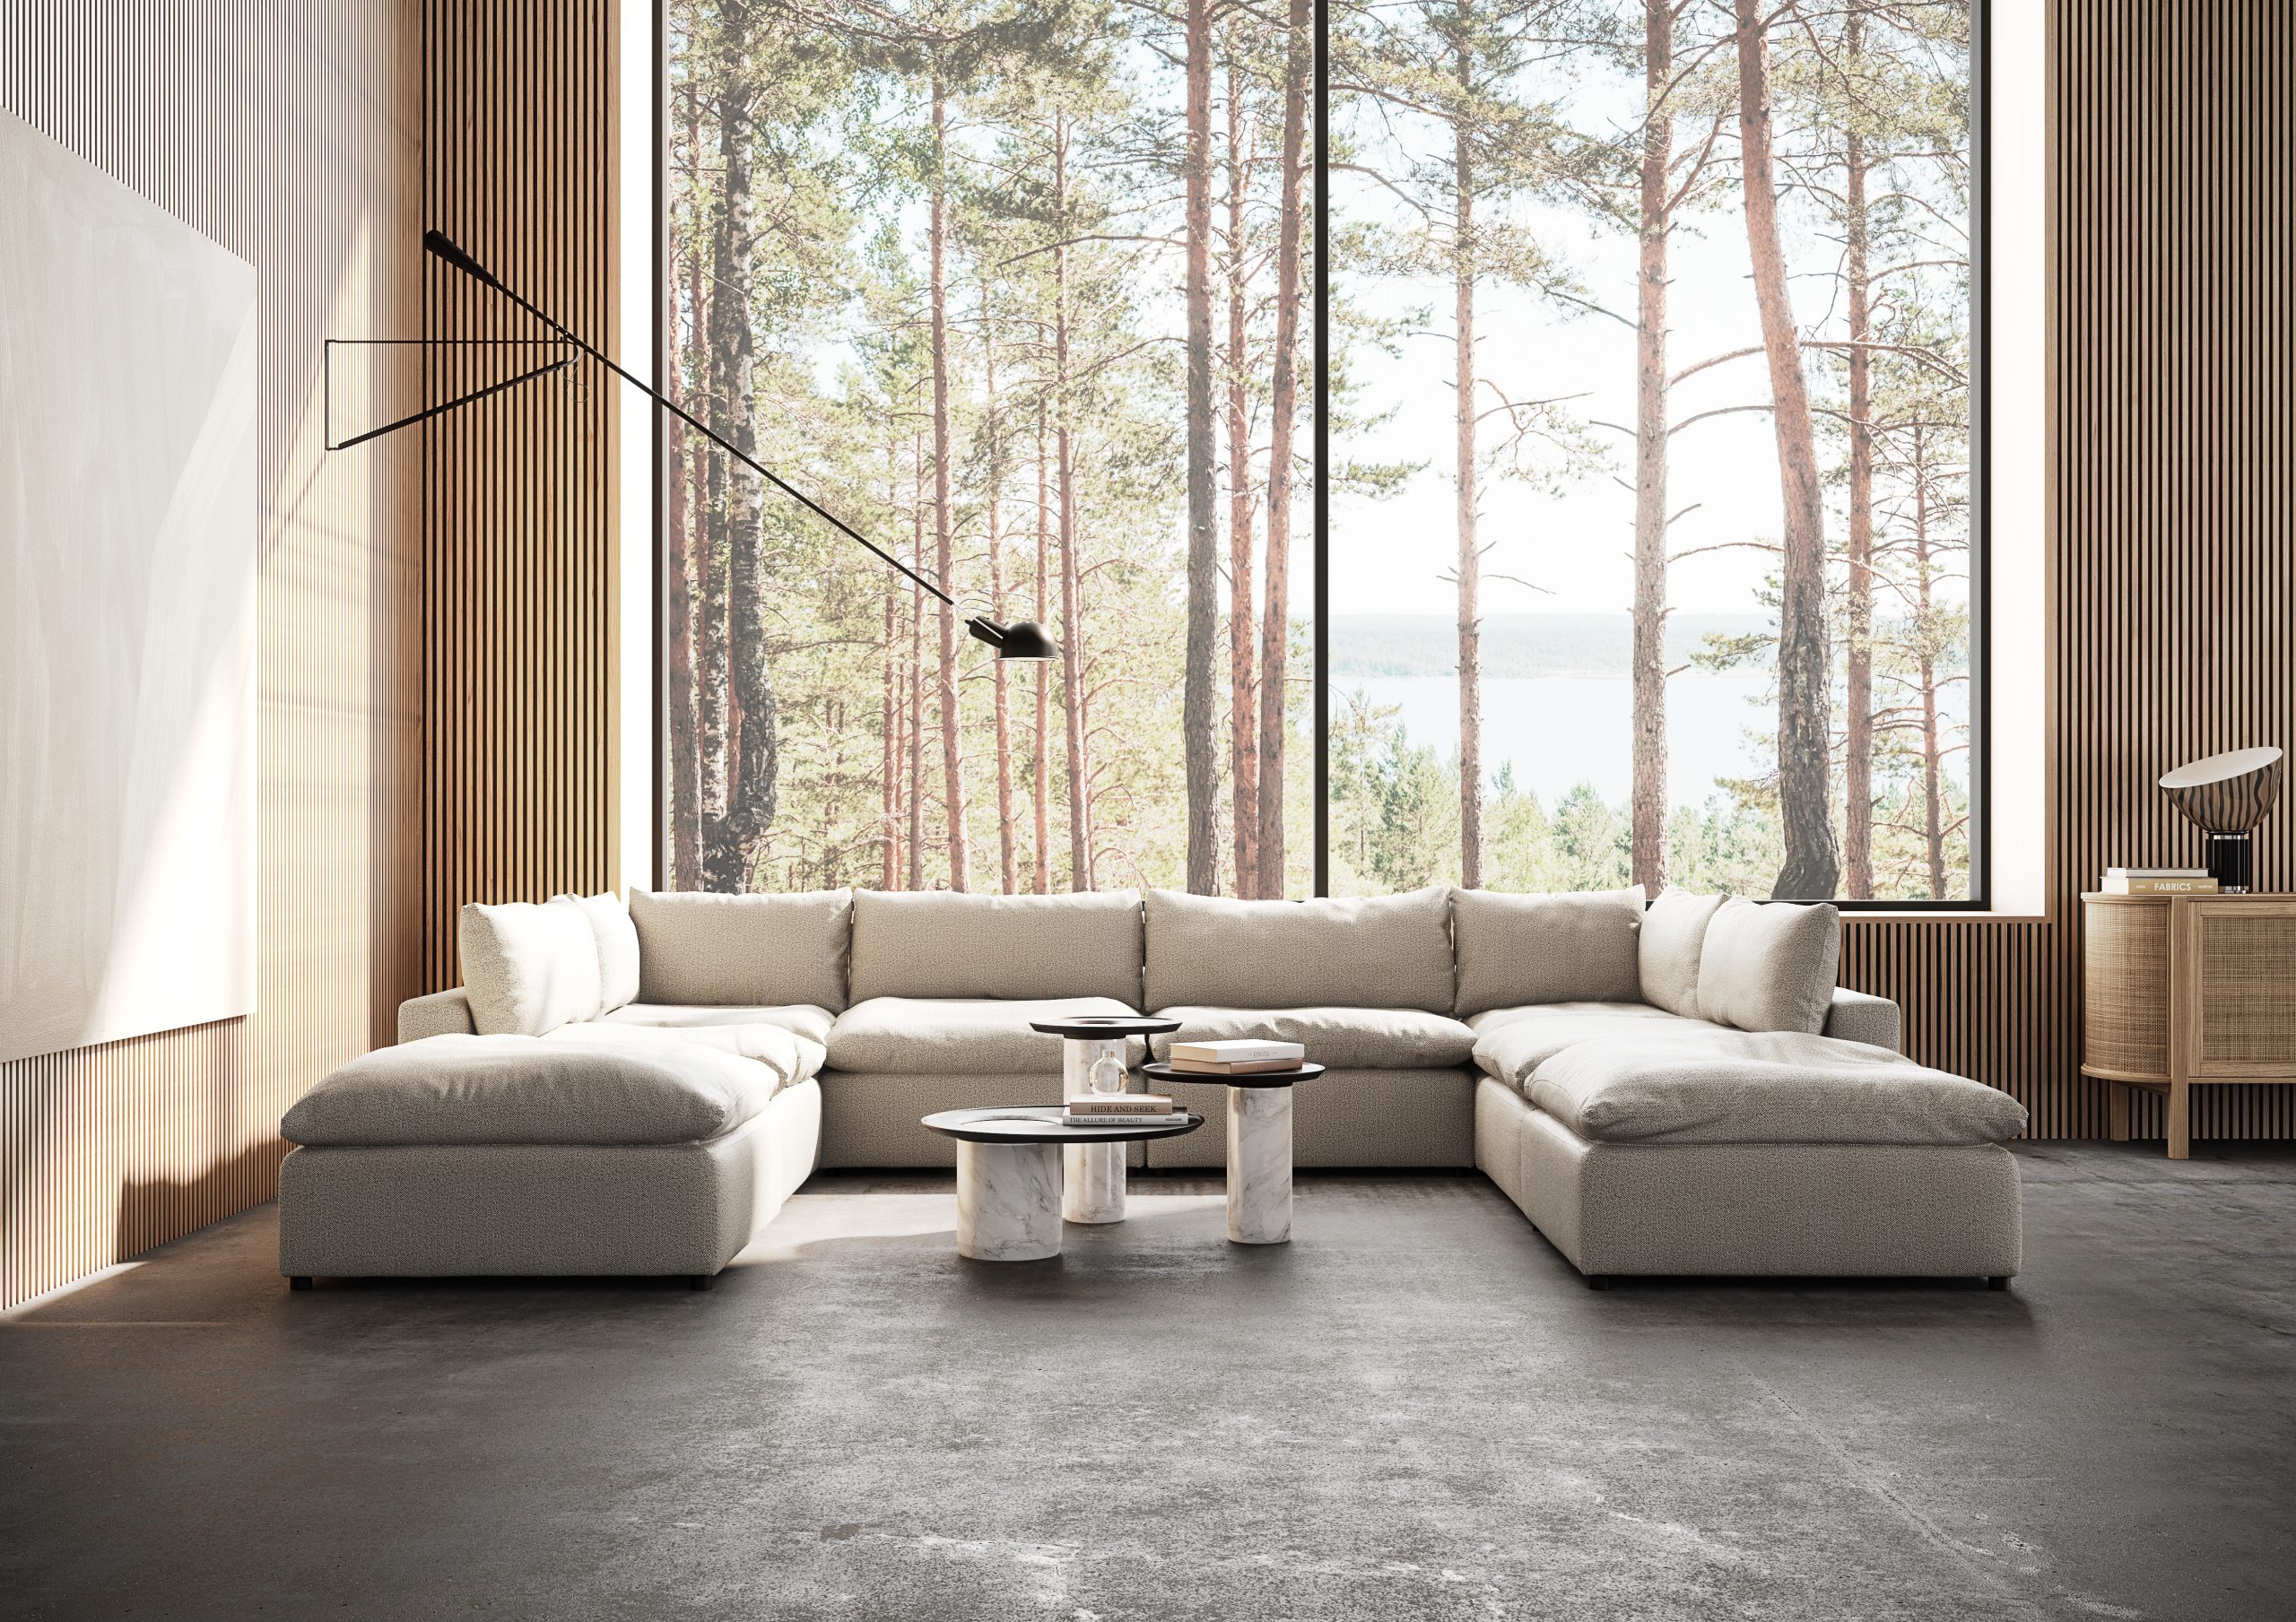 The Moonlight Sectional in a living room with a forested view